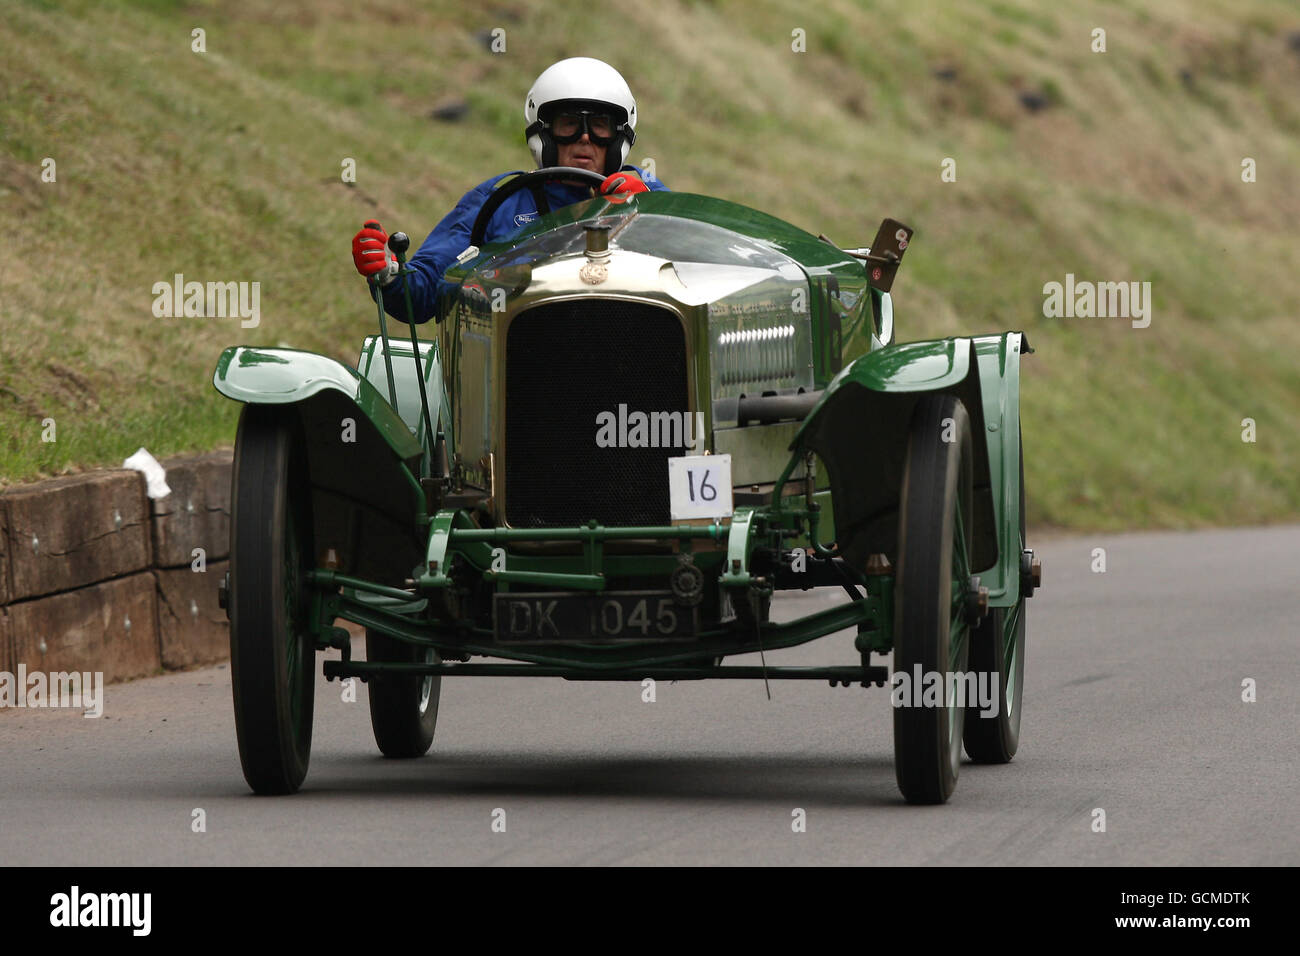 Motor Racing - The Shelsley Midsummer and Classic Meetings - Day Two - Shelsley Walsh. Mike Lemon and his 1913 Vauxhall 30-98 during Shelsley Walsh Hill Climb, Worcestershire. Stock Photo